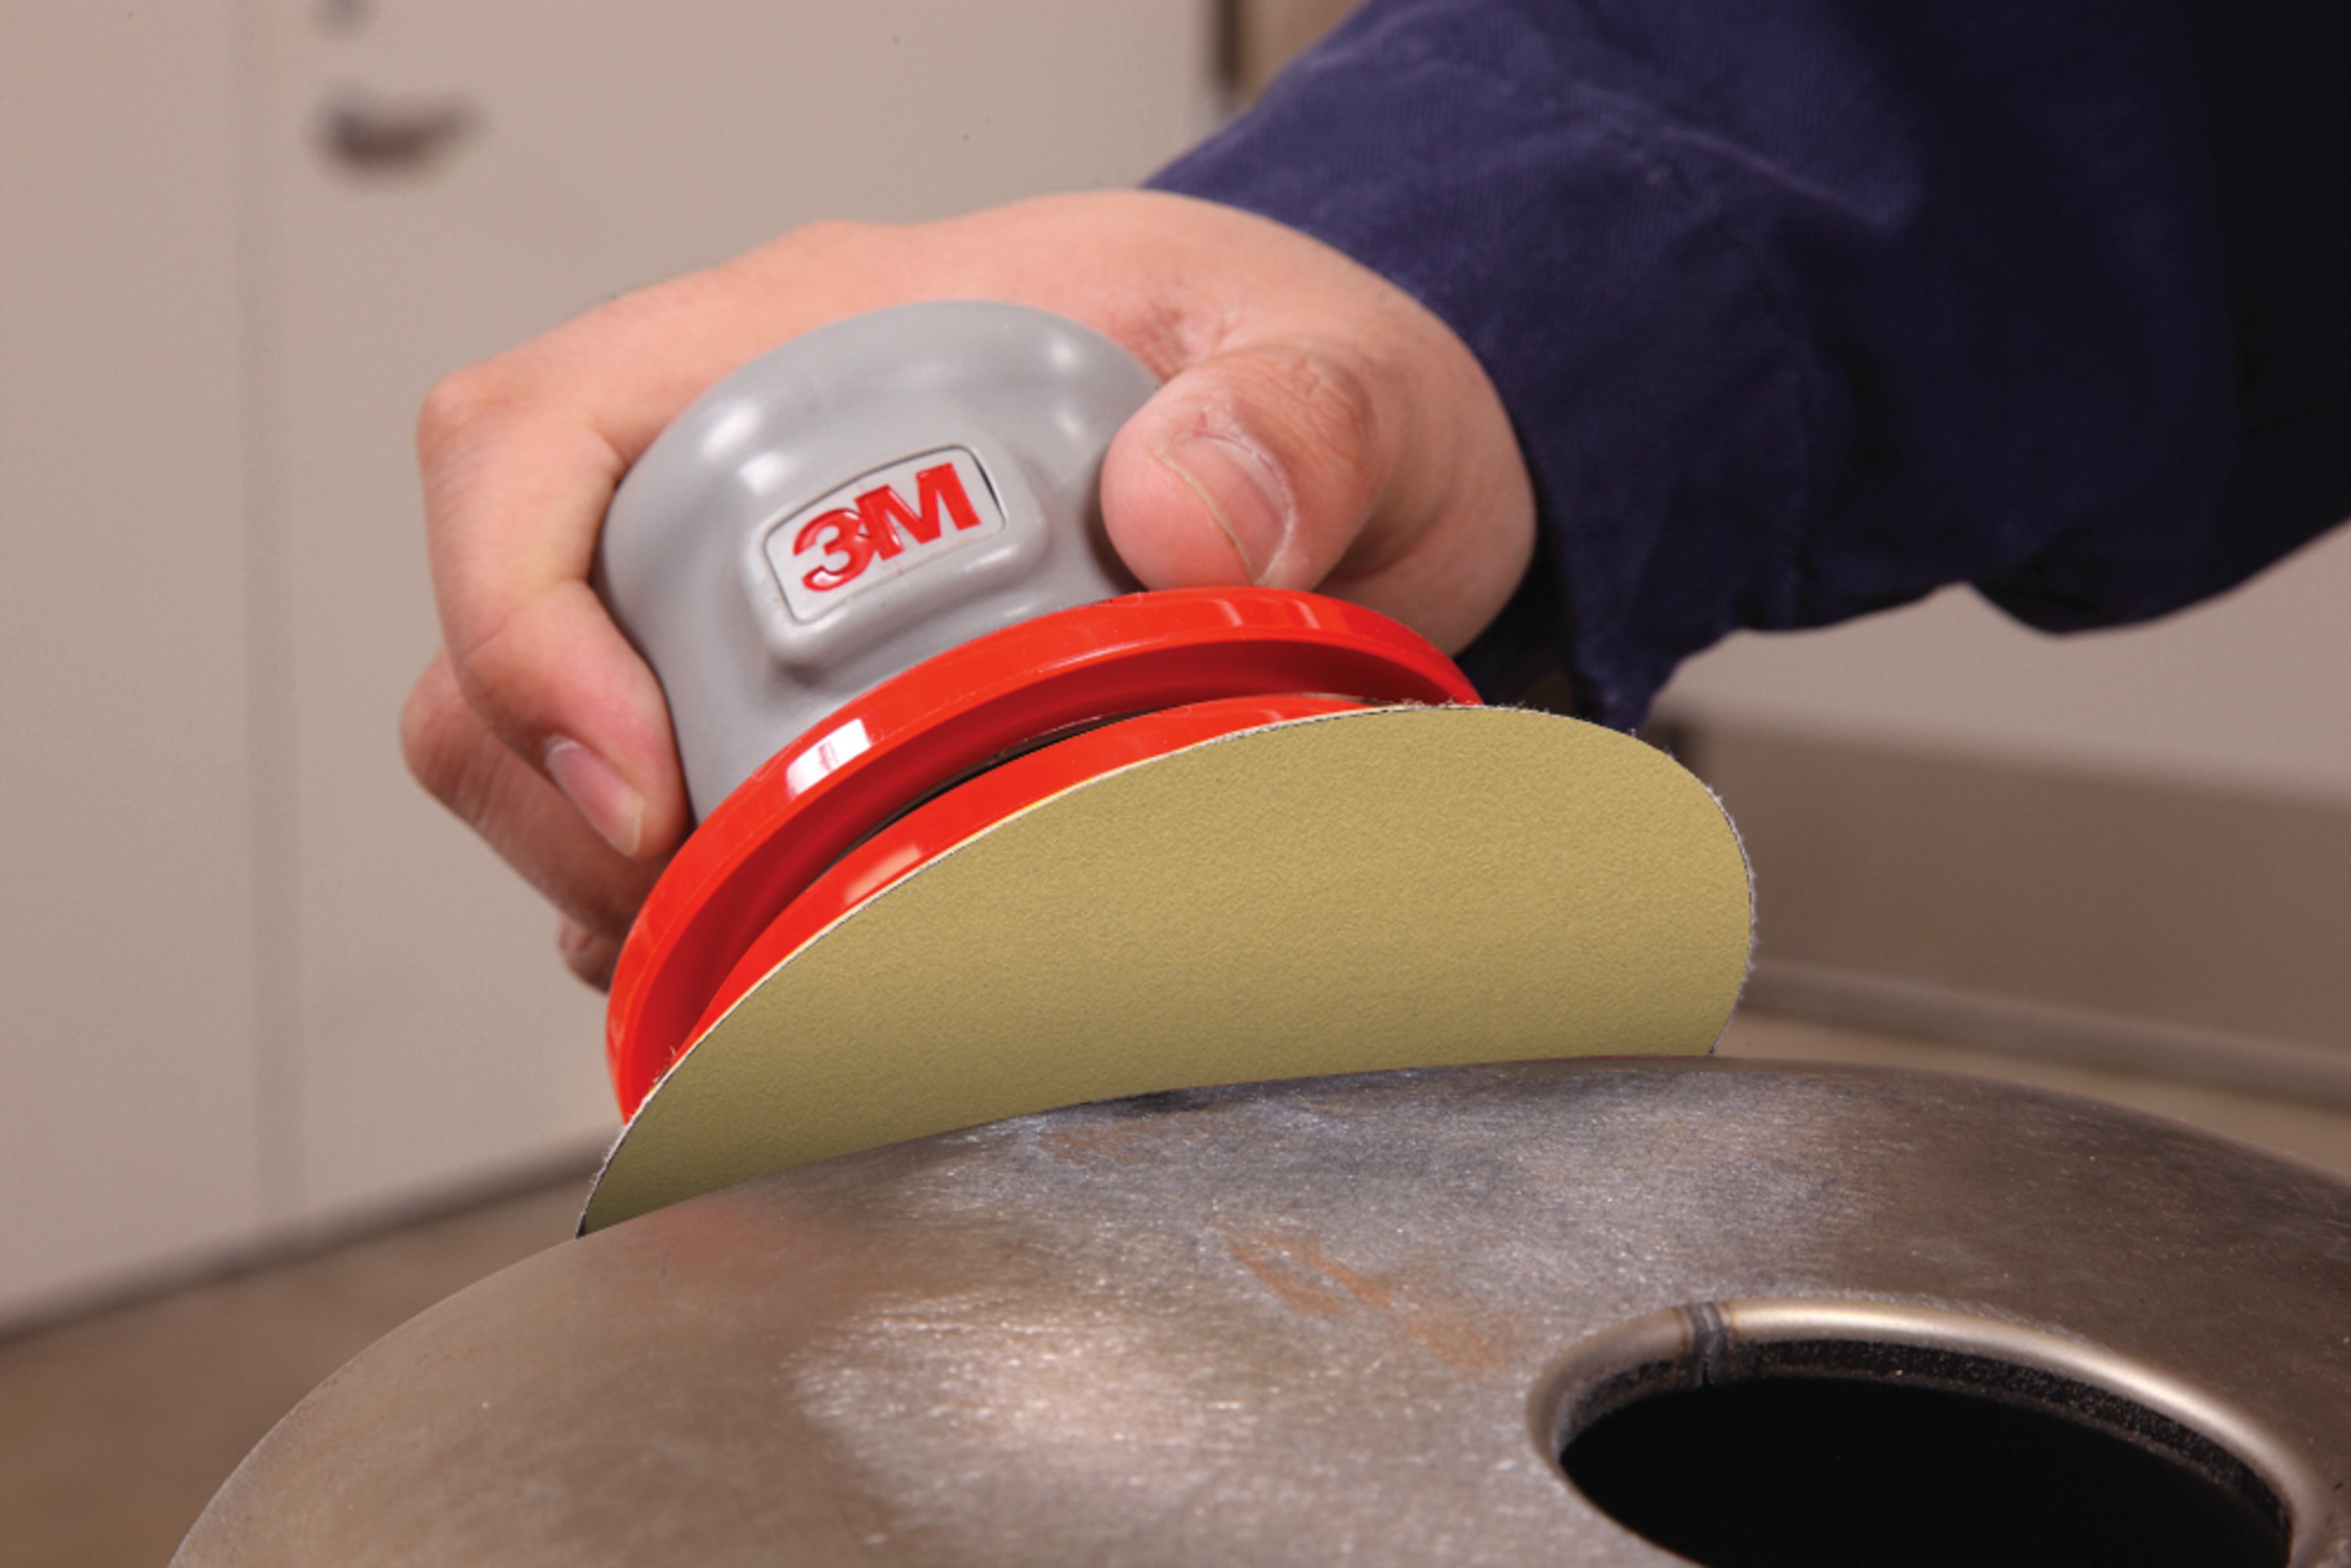 A load-resistant coating allows the disc to continue cutting even when sanding softwoods, paints, and other materials that would, otherwise, clog the surface of the disc and hinder sanding ability.